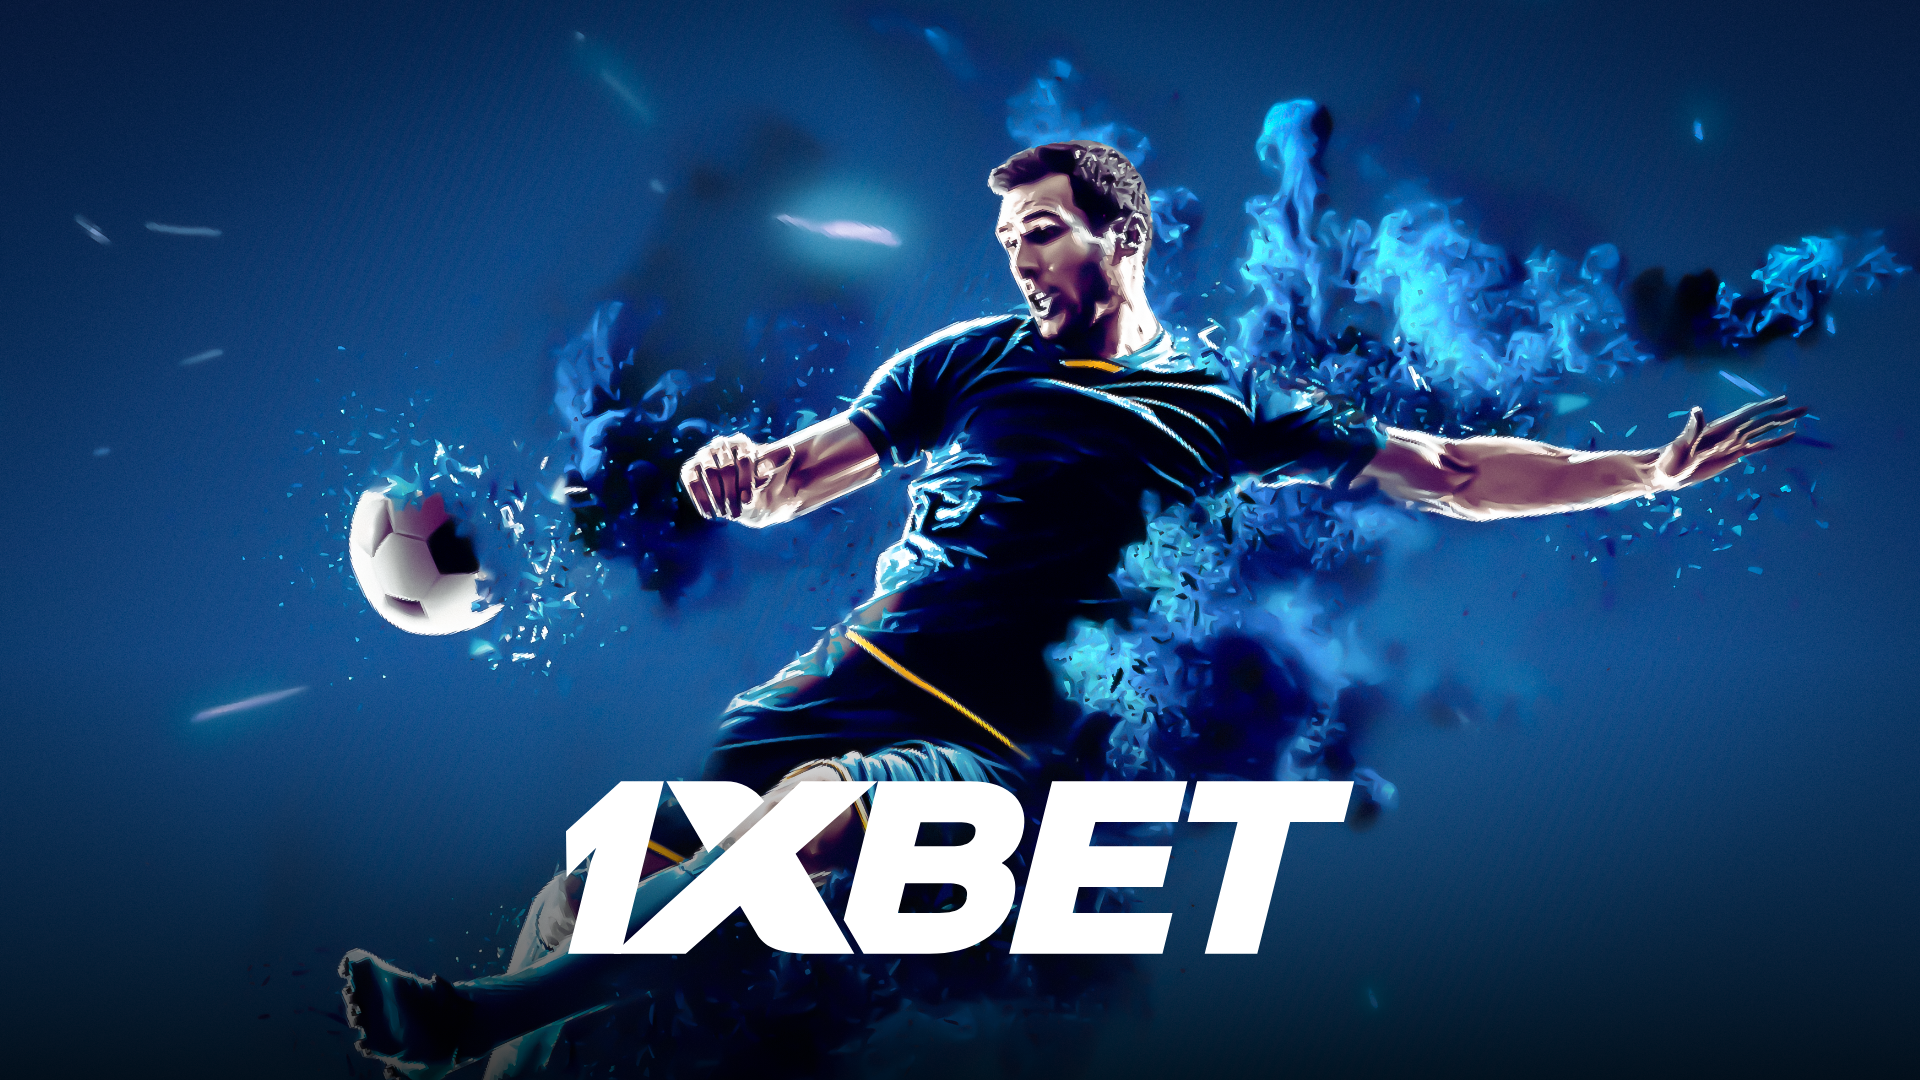 Influencer marketing case study for betting brand 1XBET | Famesters agency